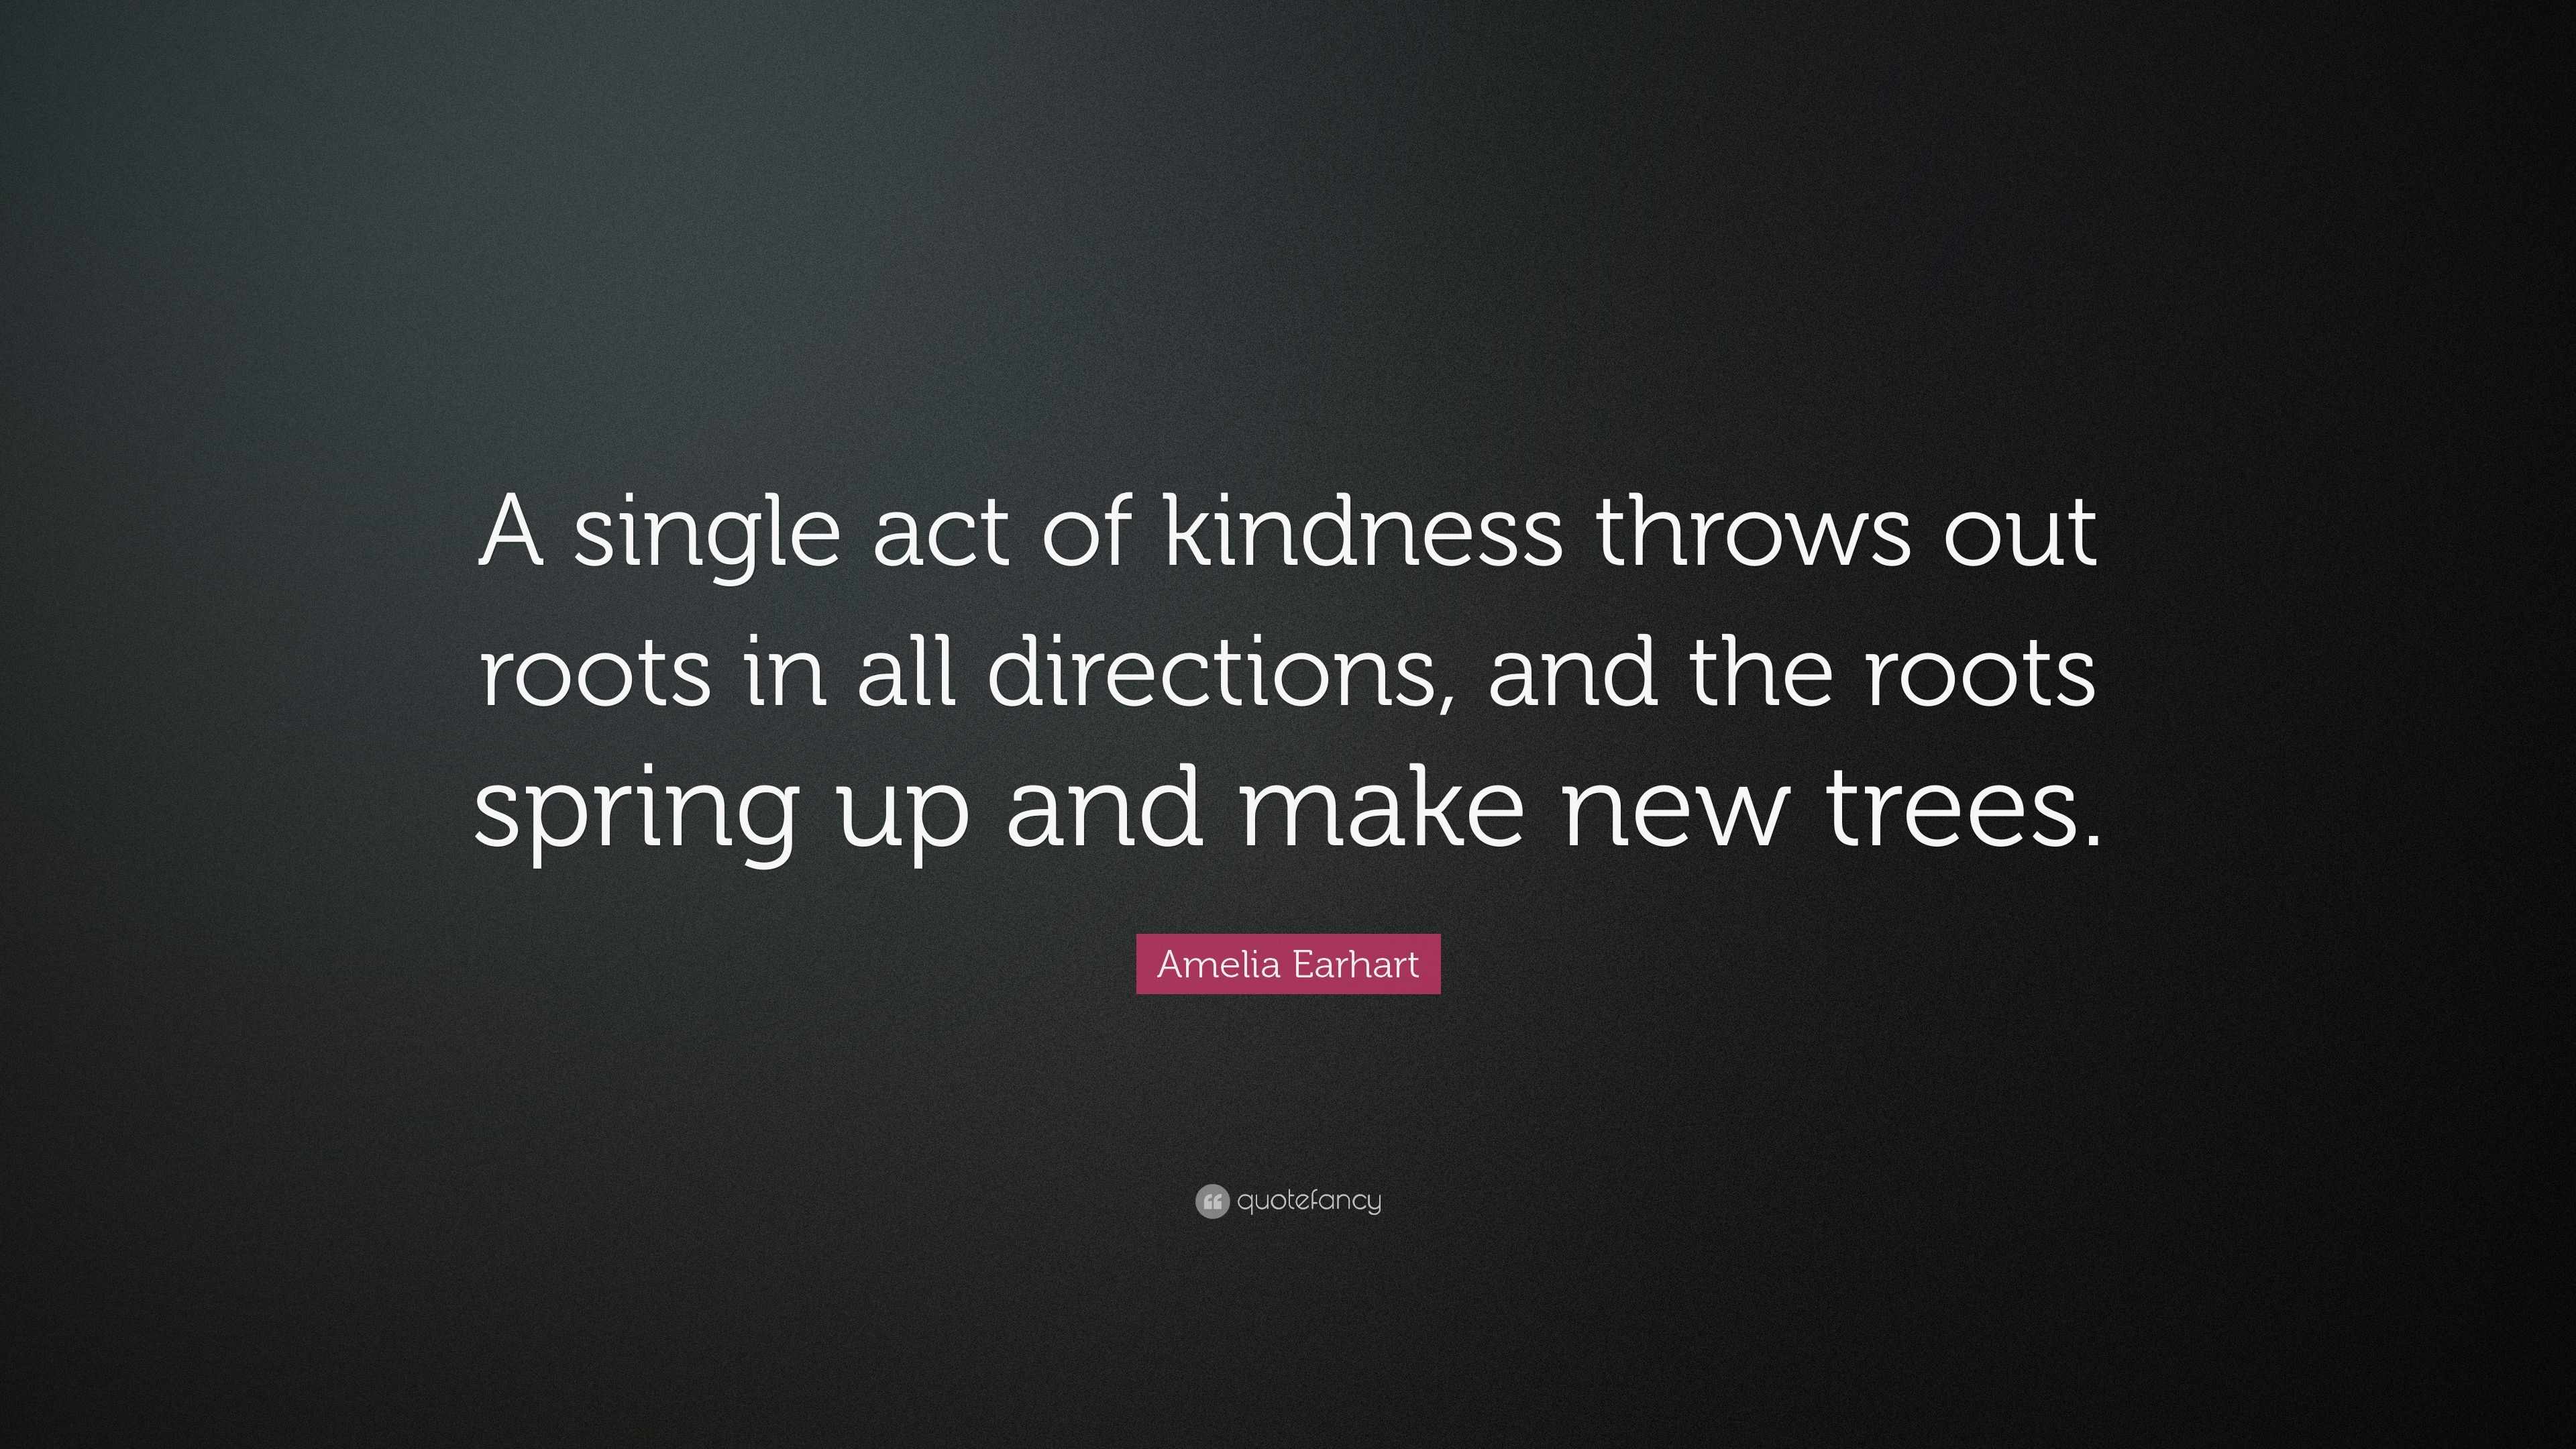 Amelia Earhart Quote: “A single act of kindness throws out roots